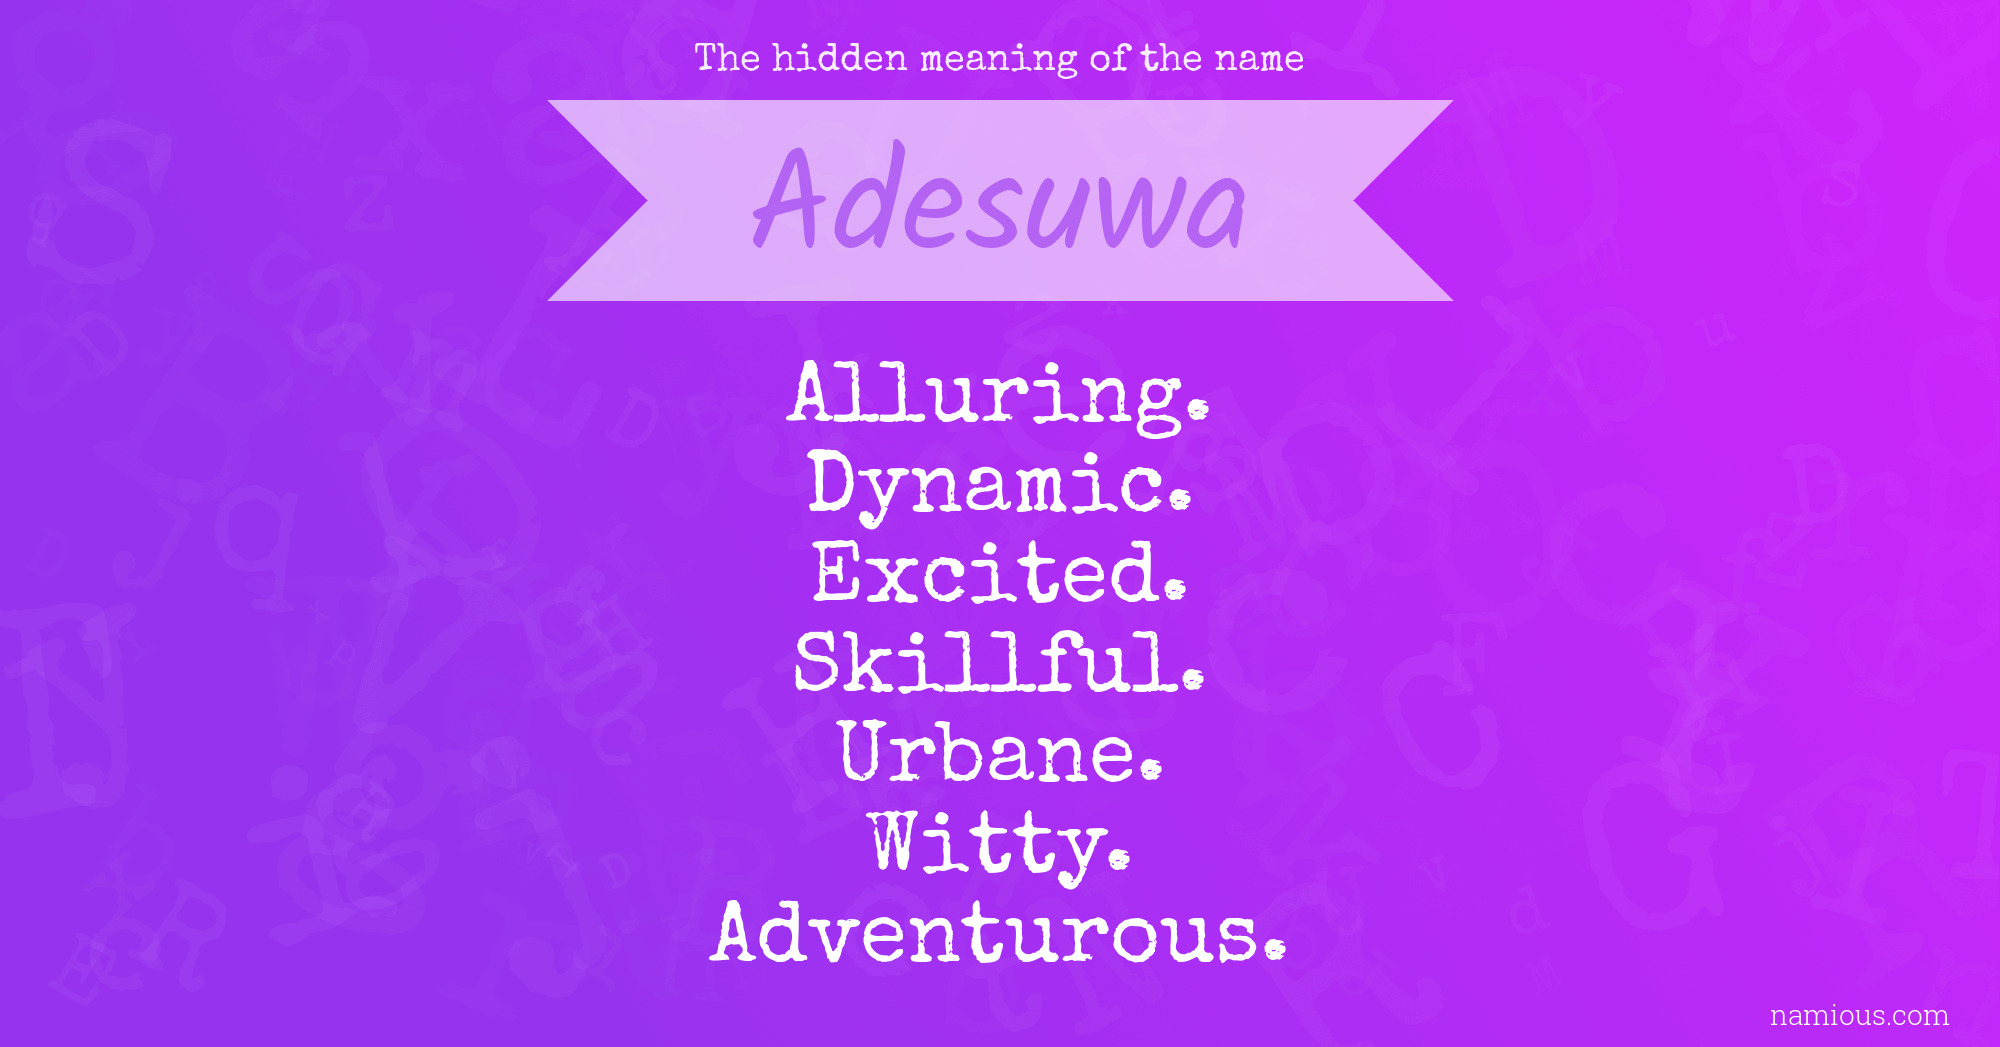 The hidden meaning of the name Adesuwa